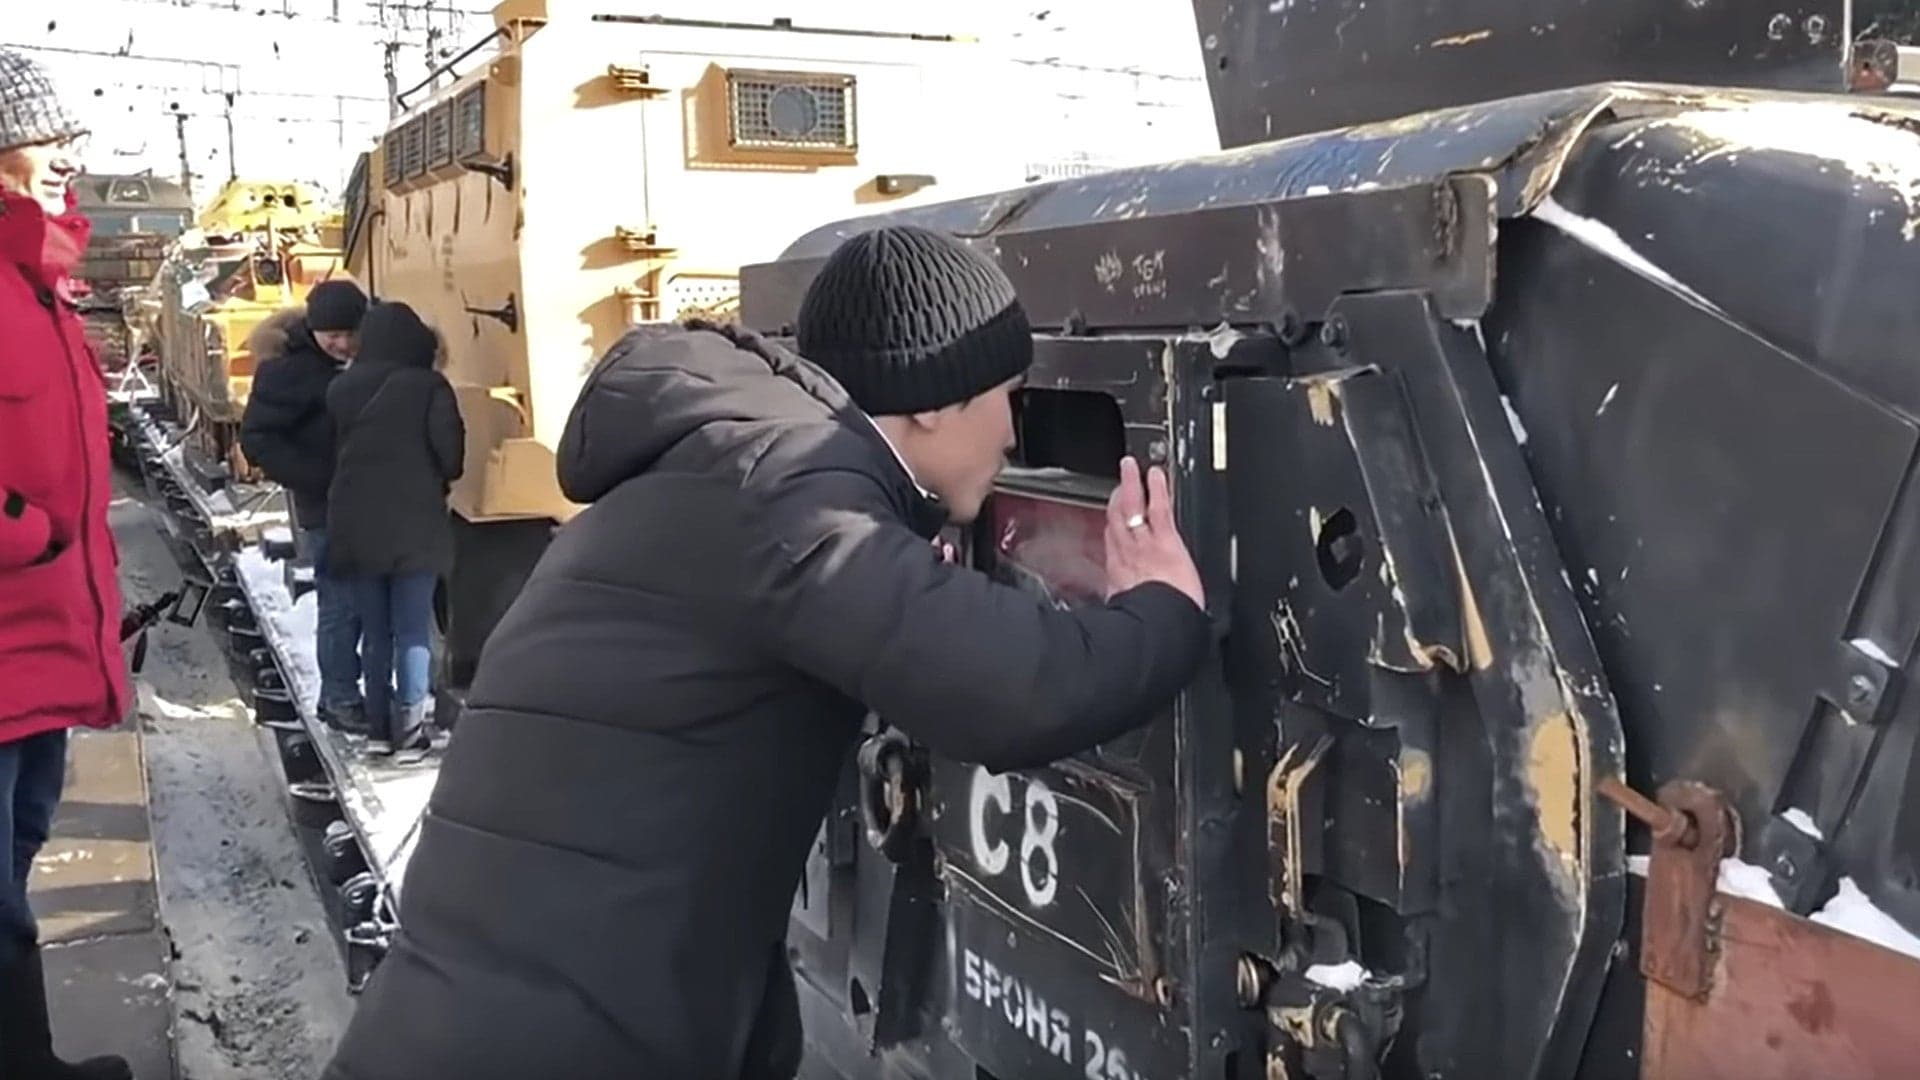 Moscow Has A “Syrian Fracture” Propaganda Train Loaded With War Trophies Crisscrossing Russia